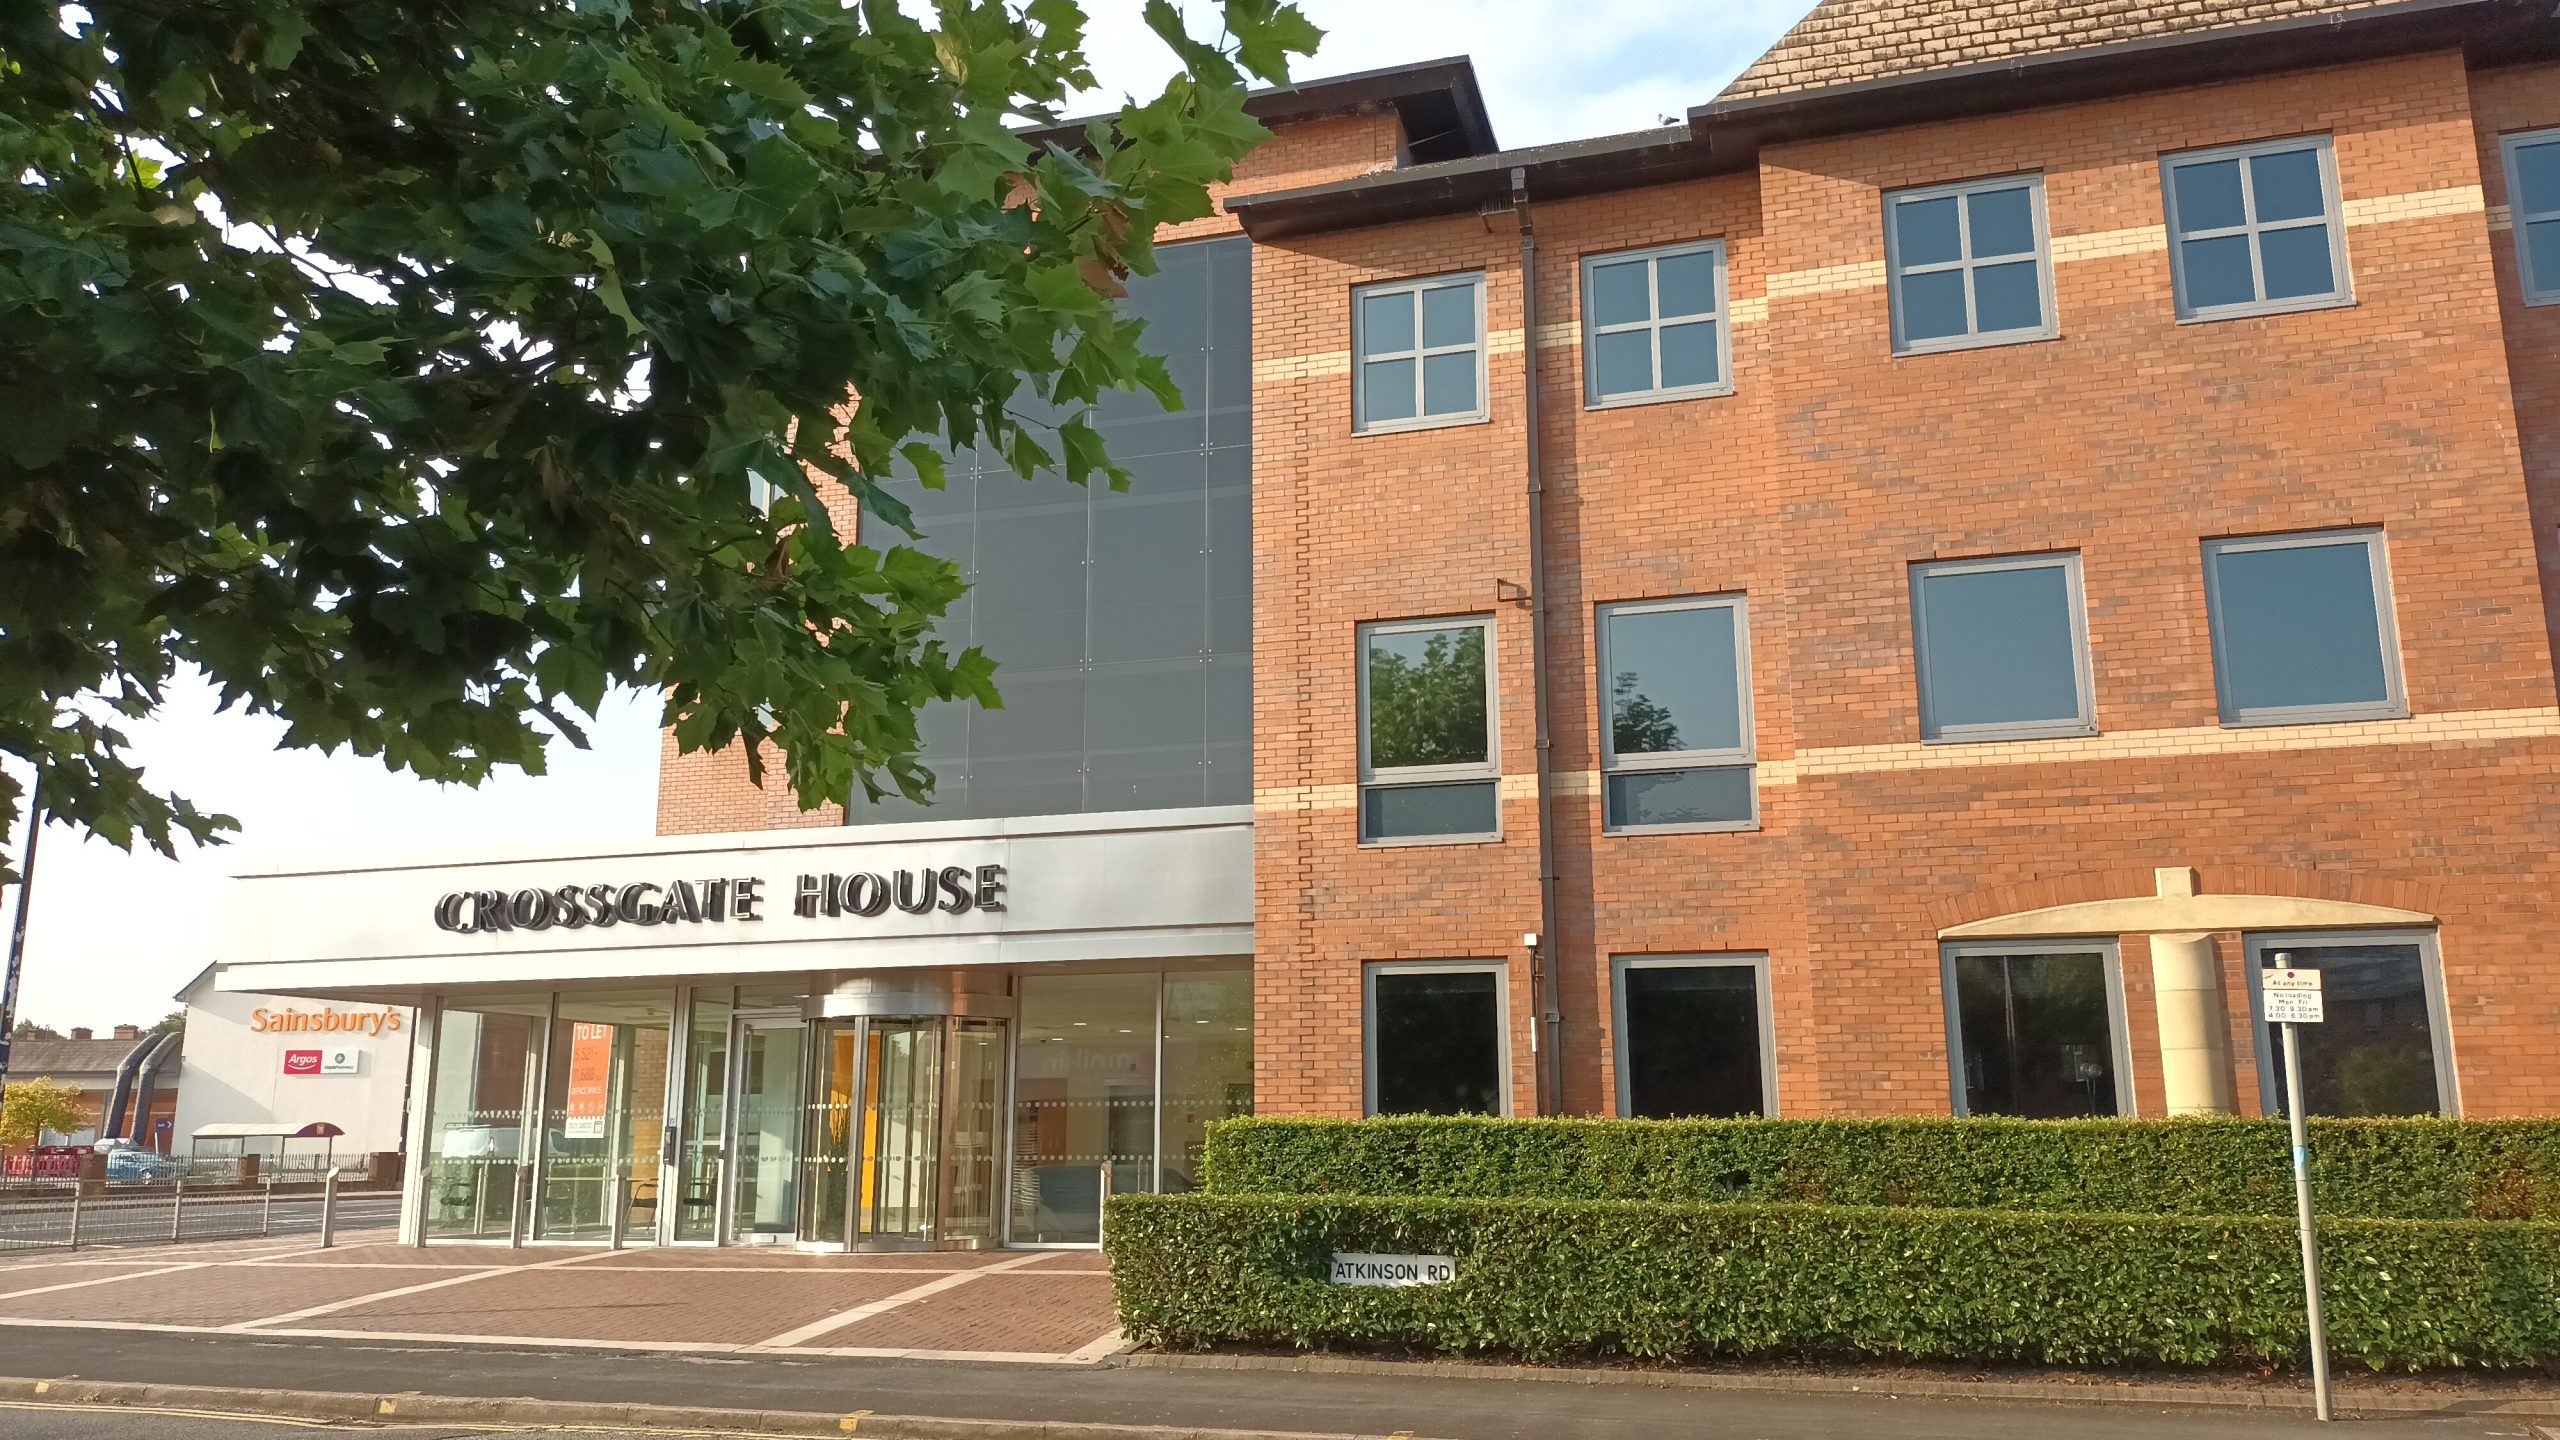 A new era for TQUK as we move to Crossgate House